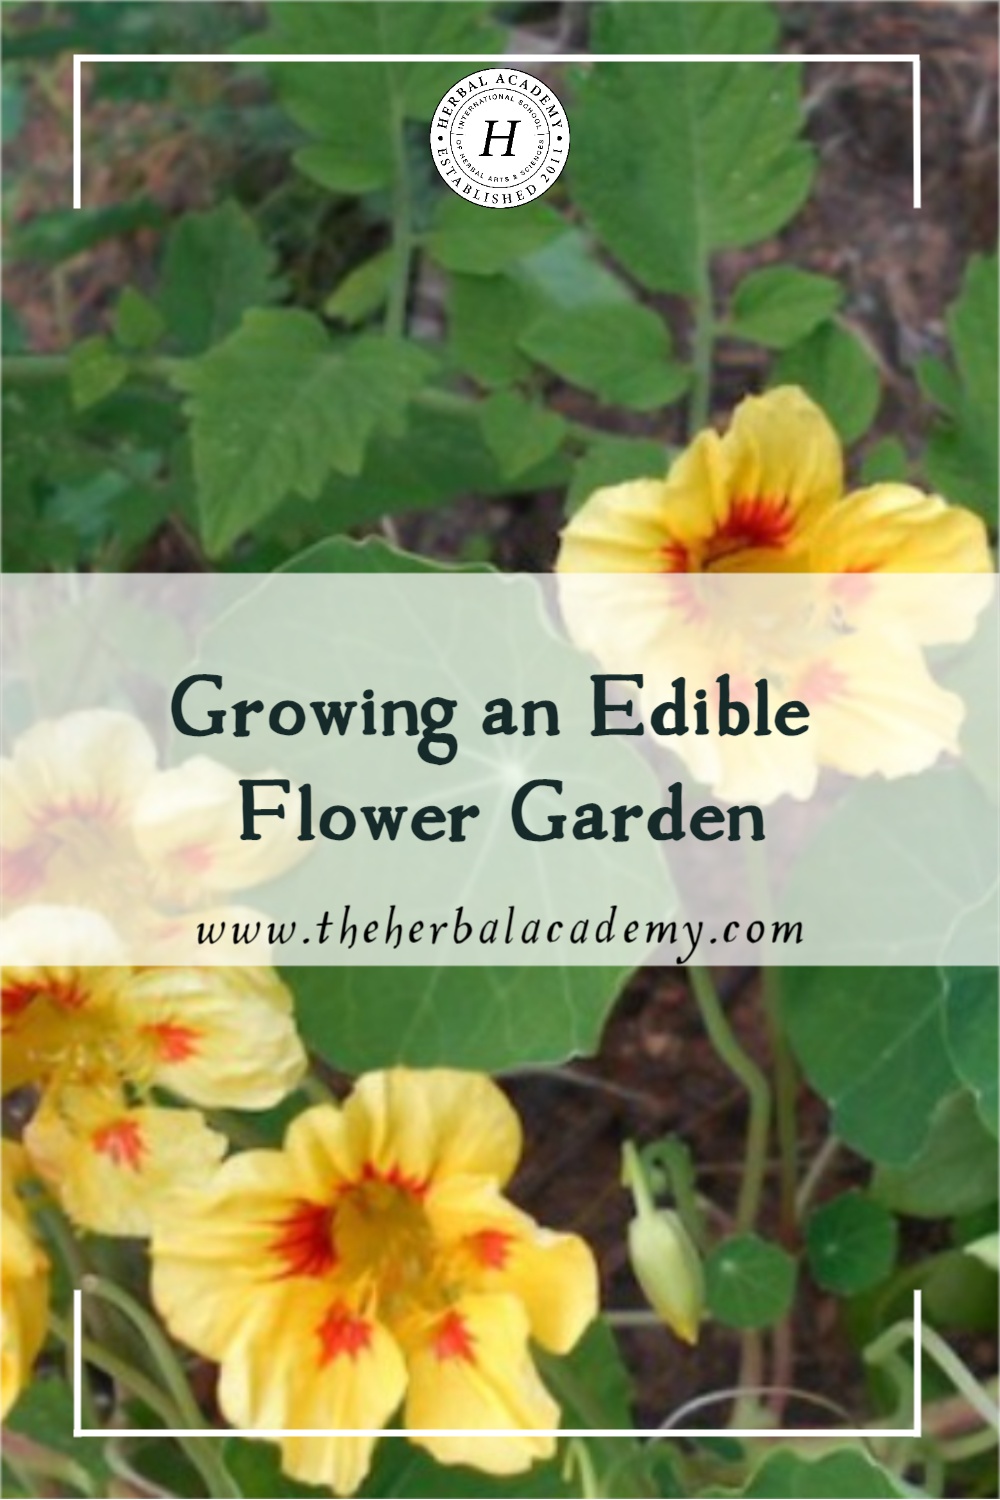 Growing an Edible Flower Garden | Herbal Academy | Growing an edible flower garden is done in pots or flower beds and you’ll discover a million and one uses for these ephemeral beauties.